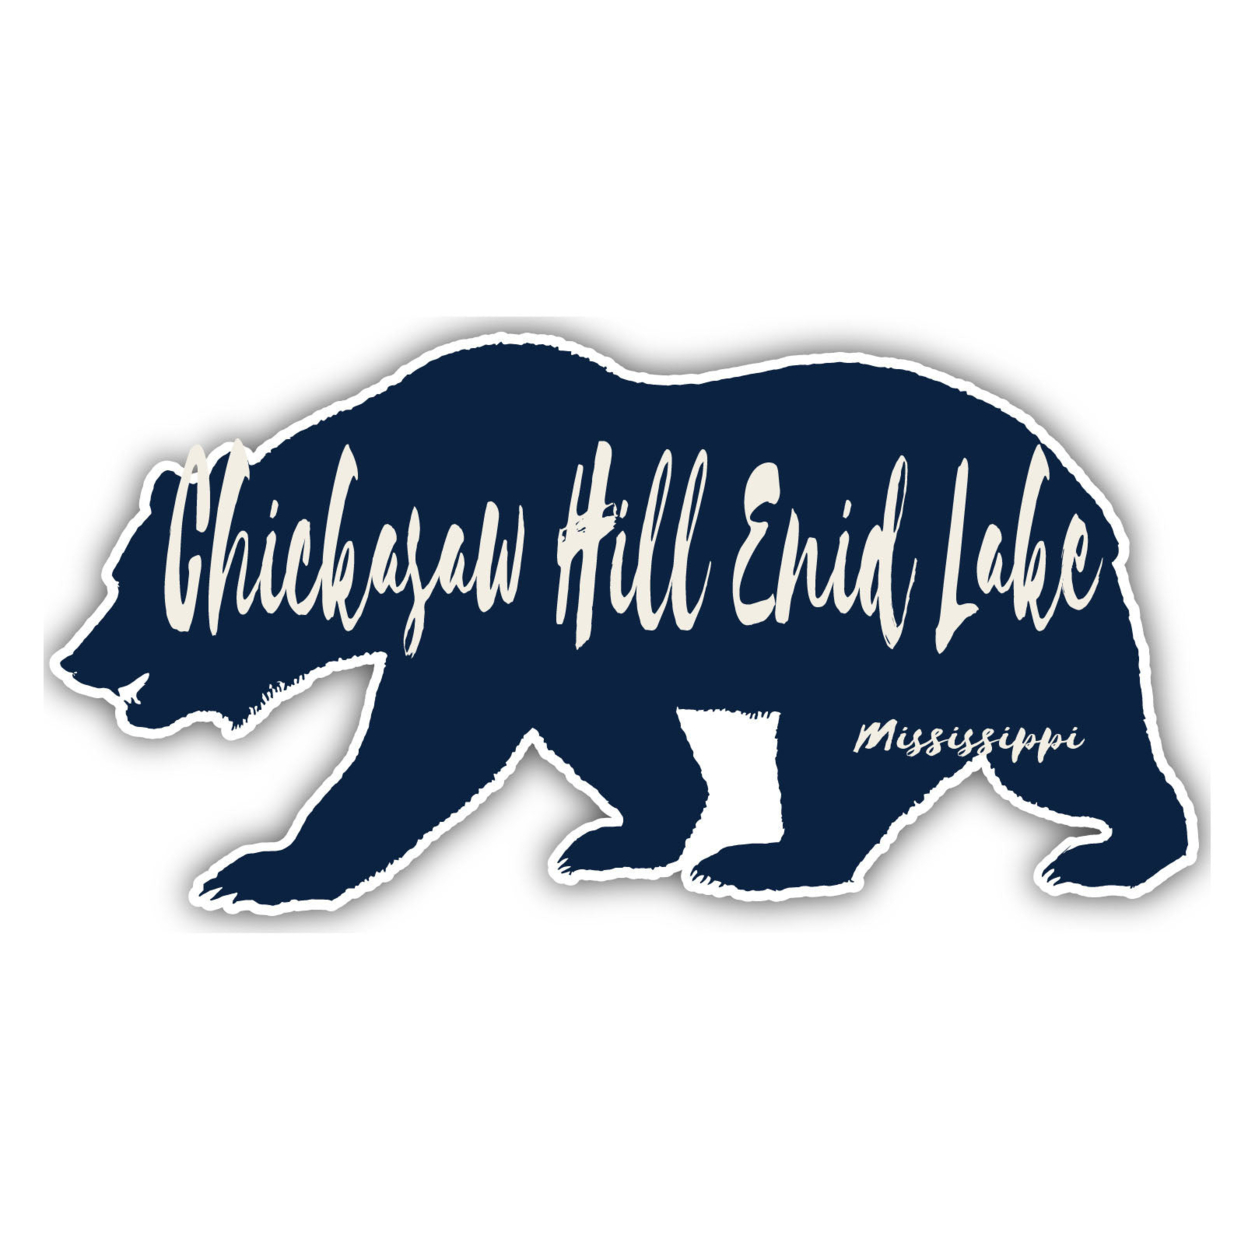 Chickasaw Hill Enid Lake Mississippi Souvenir Decorative Stickers (Choose Theme And Size) - Single Unit, 2-Inch, Bear